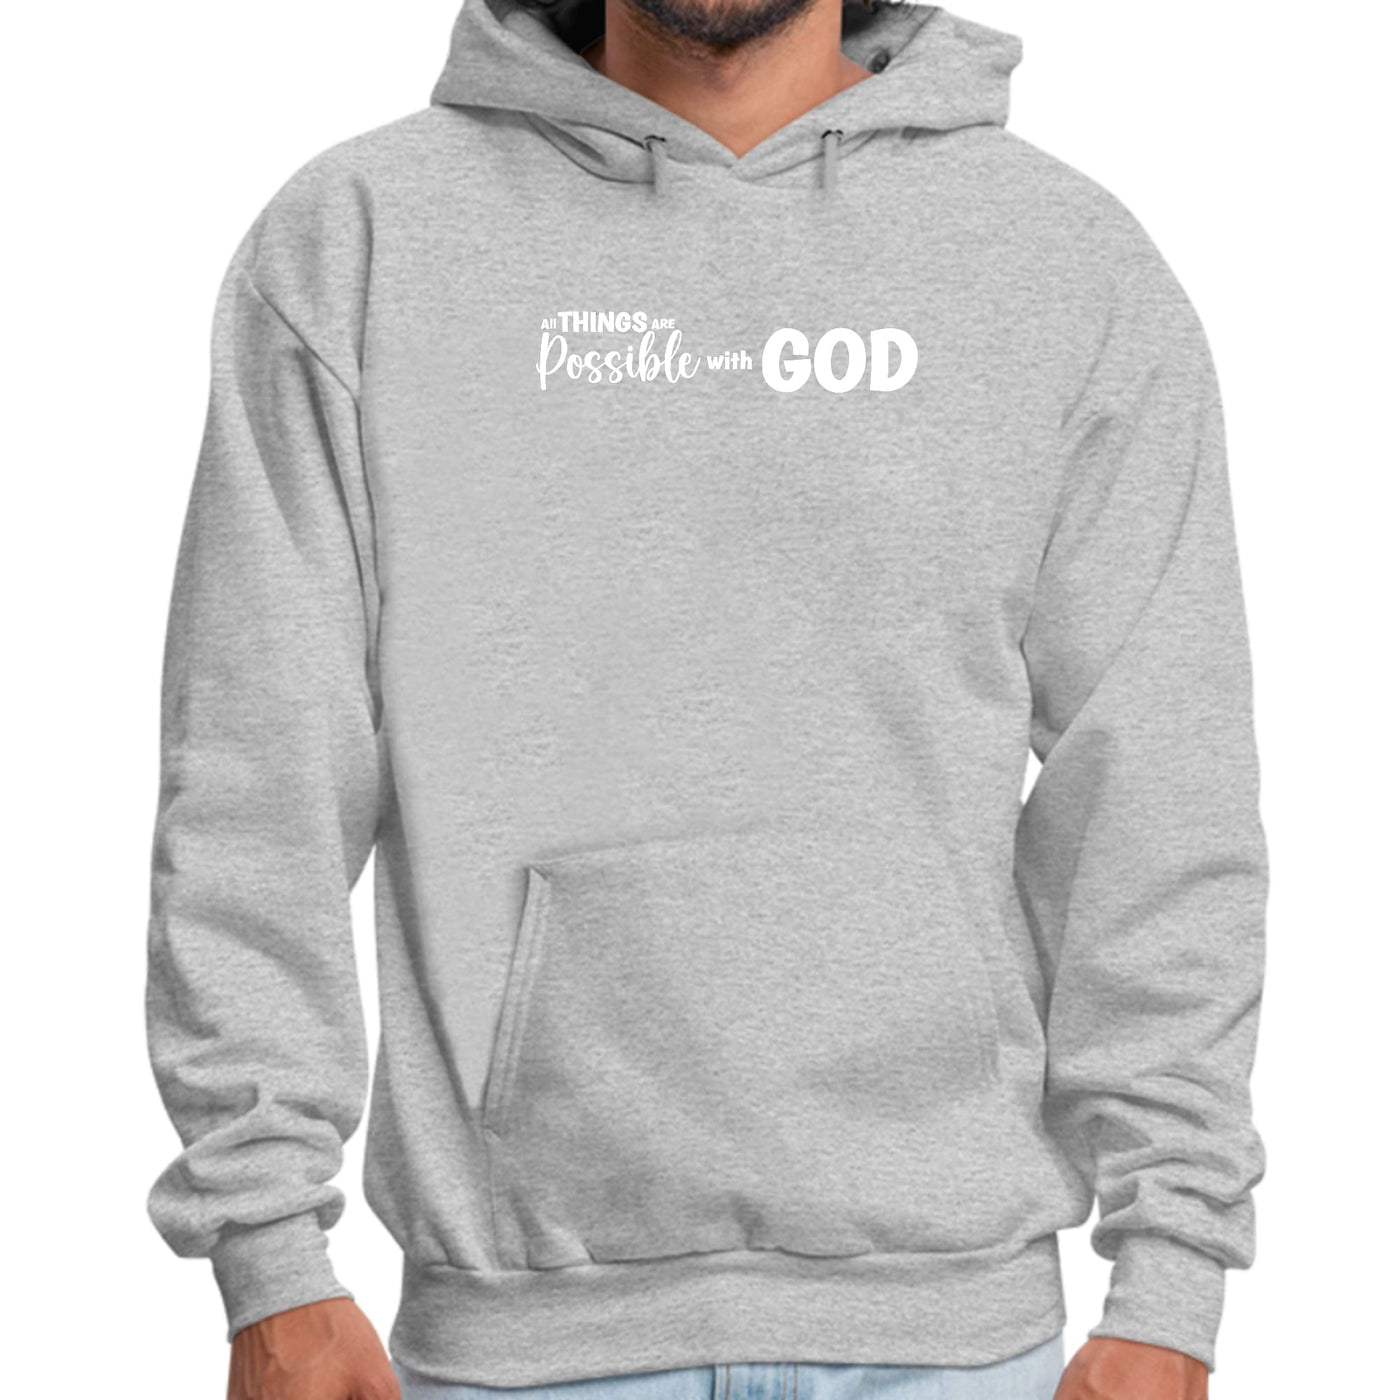 Mens Graphic Hoodie All Things Are Possible With God - Unisex | Hoodies